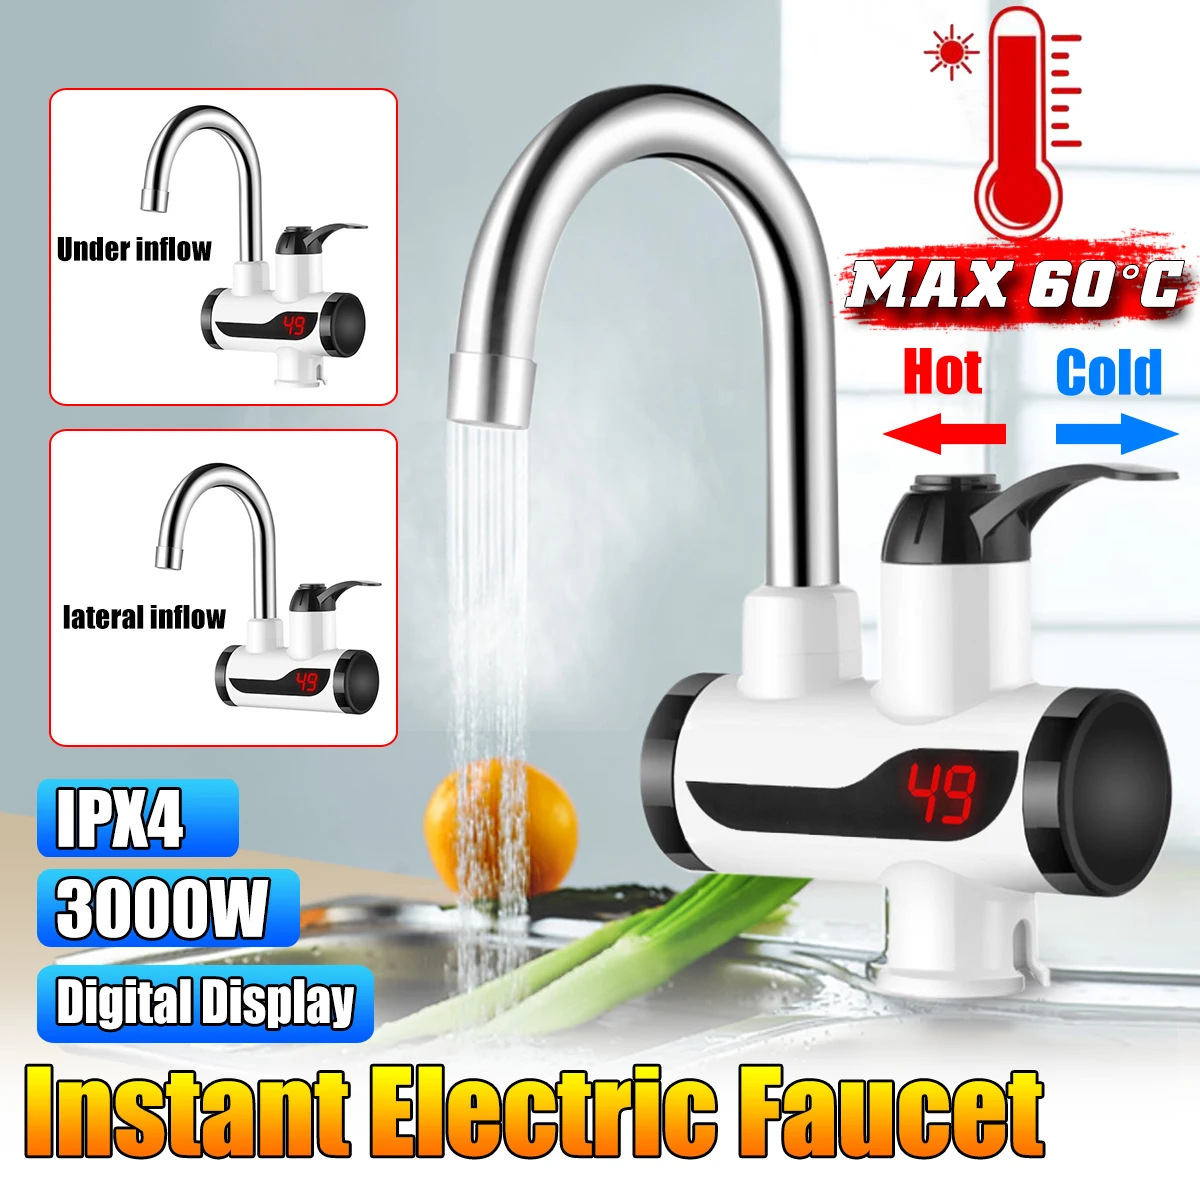 

EU Under/lateral inflow Instant Electric Faucet Tap Hot Water-Heater LED Display Bathroom Kitchen Faucet Tap Hot Water-Heate